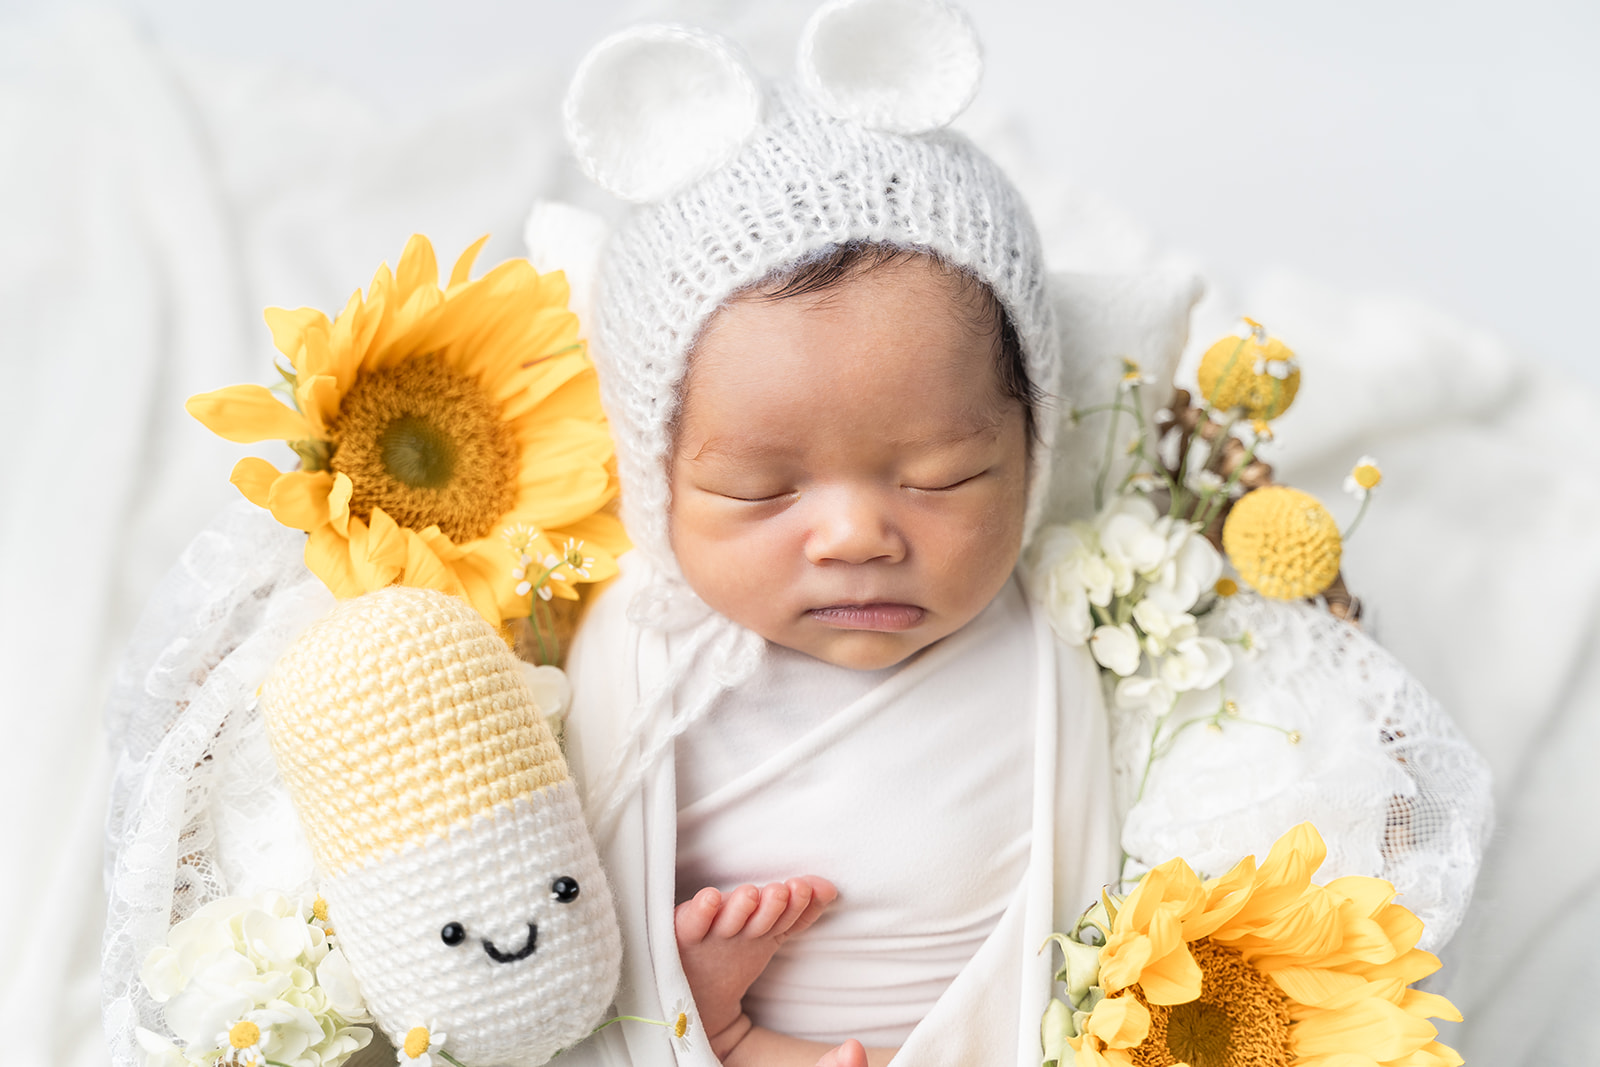 A newborn baby in a knit bonnet with ears sleeps in a basket with sunflowers and other wildflowers in a studio with help from South Coast Midwifery